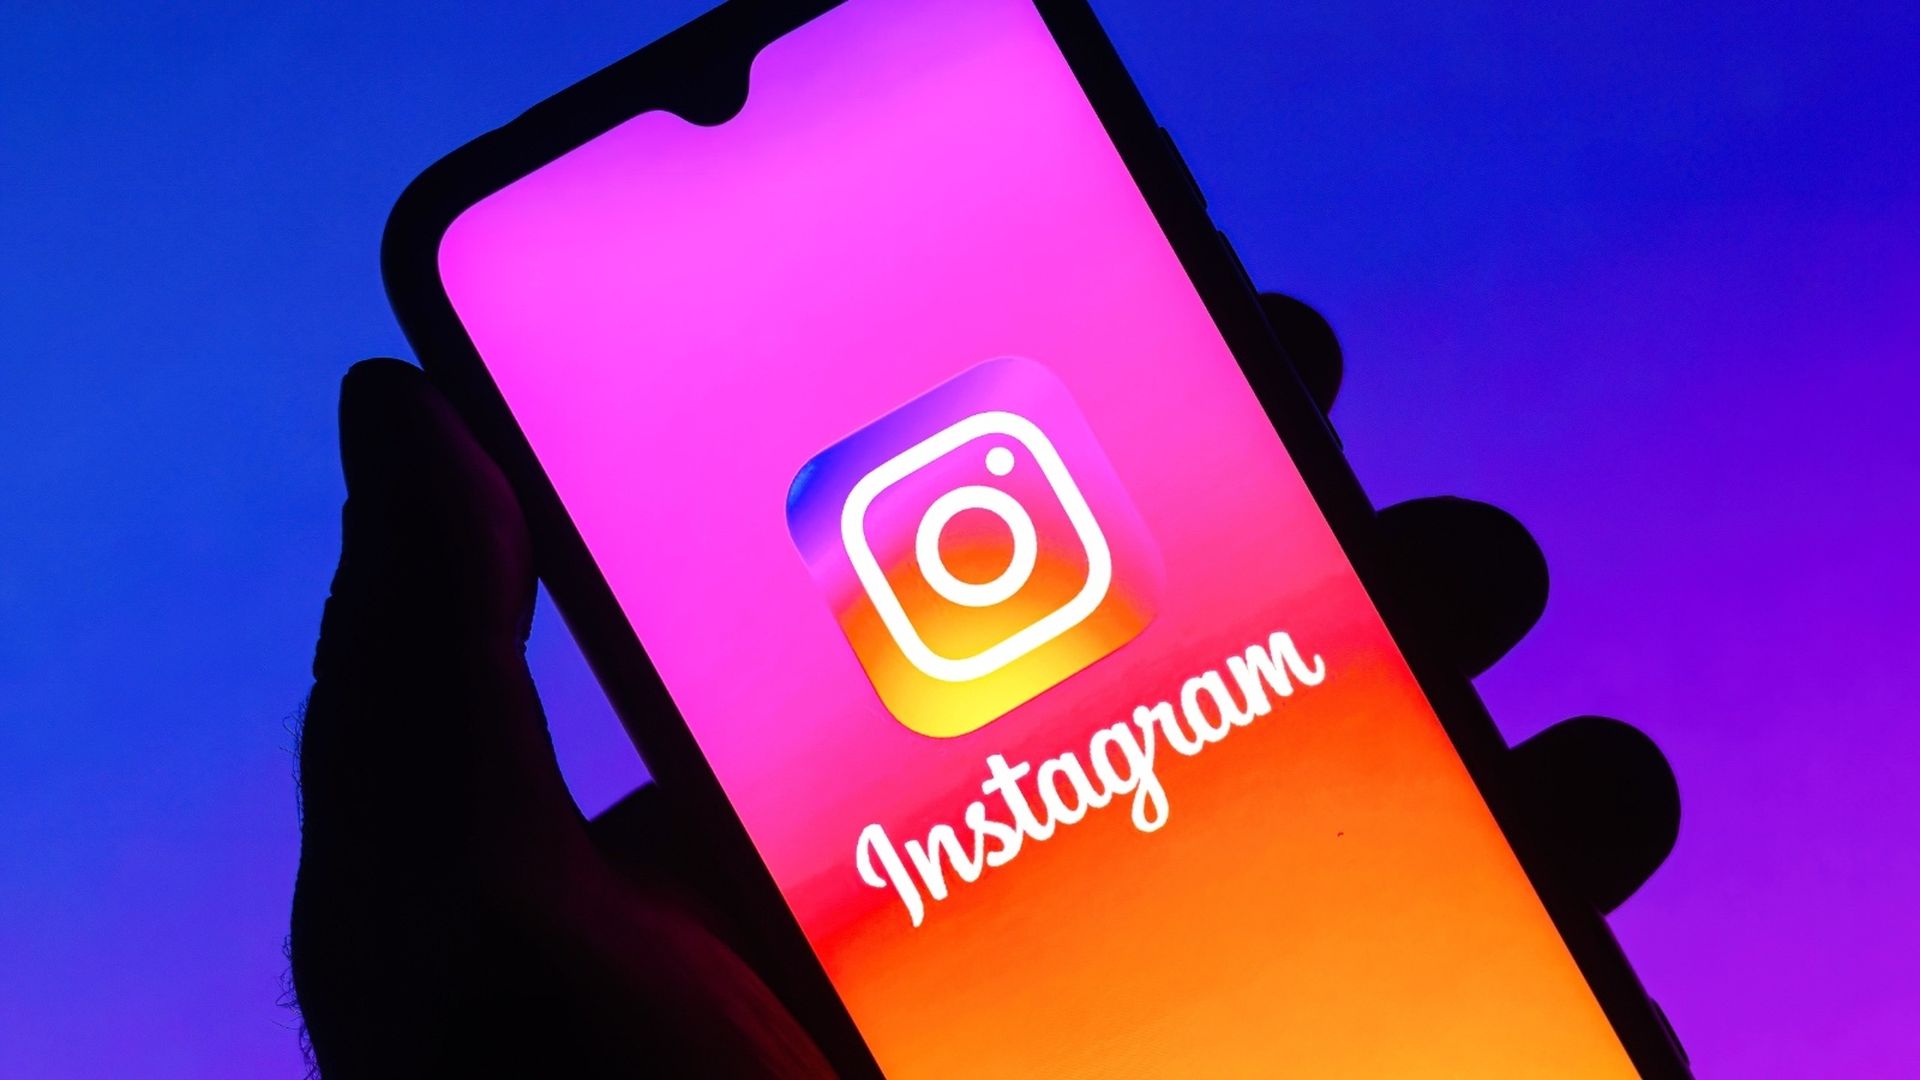 In this article, we are going to be covering the new Change.org Instagram petition to remove the suggested posts from users' feeds.